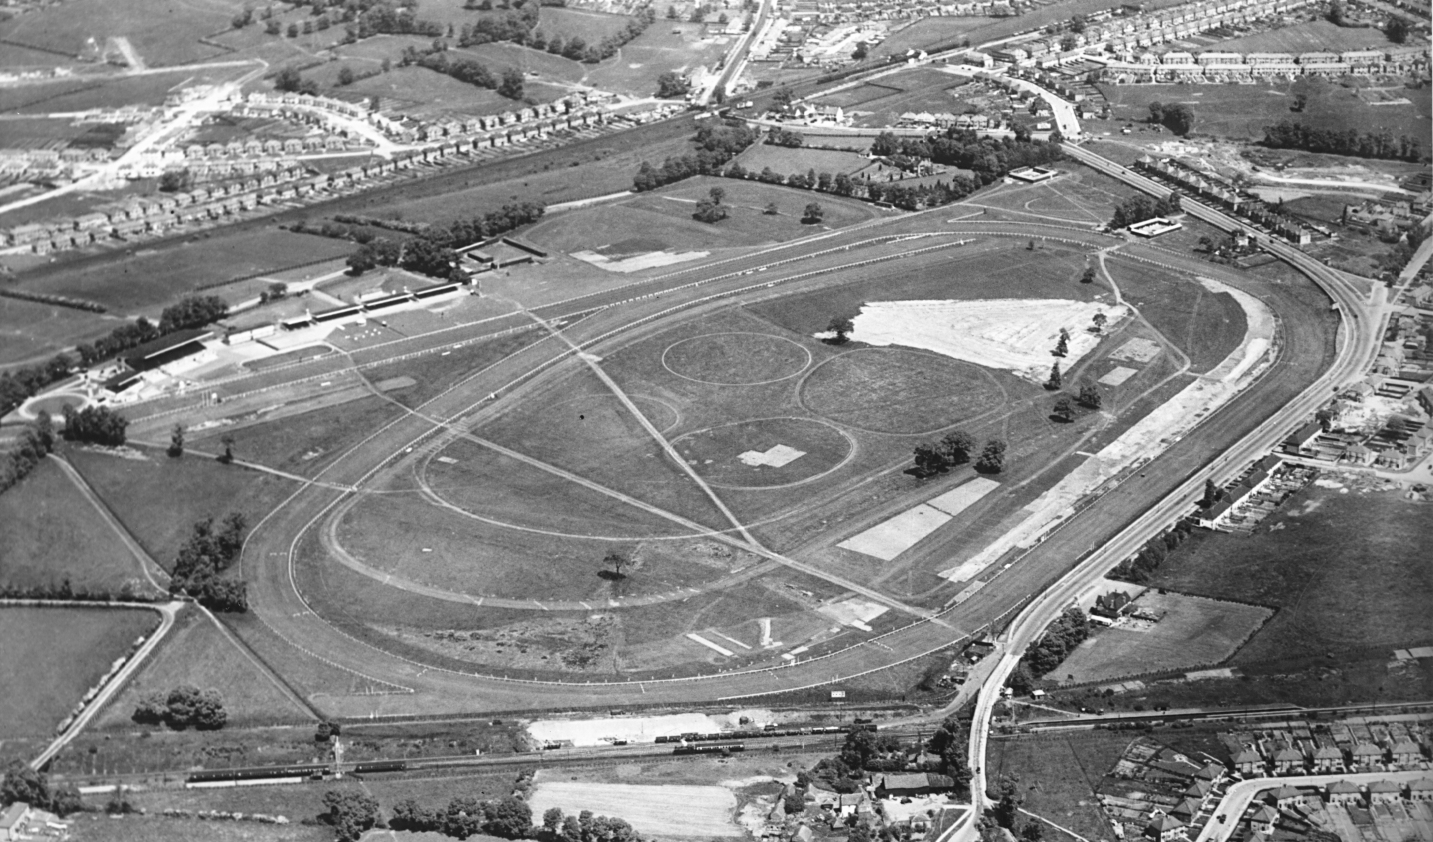 Racecourse - May 1934r